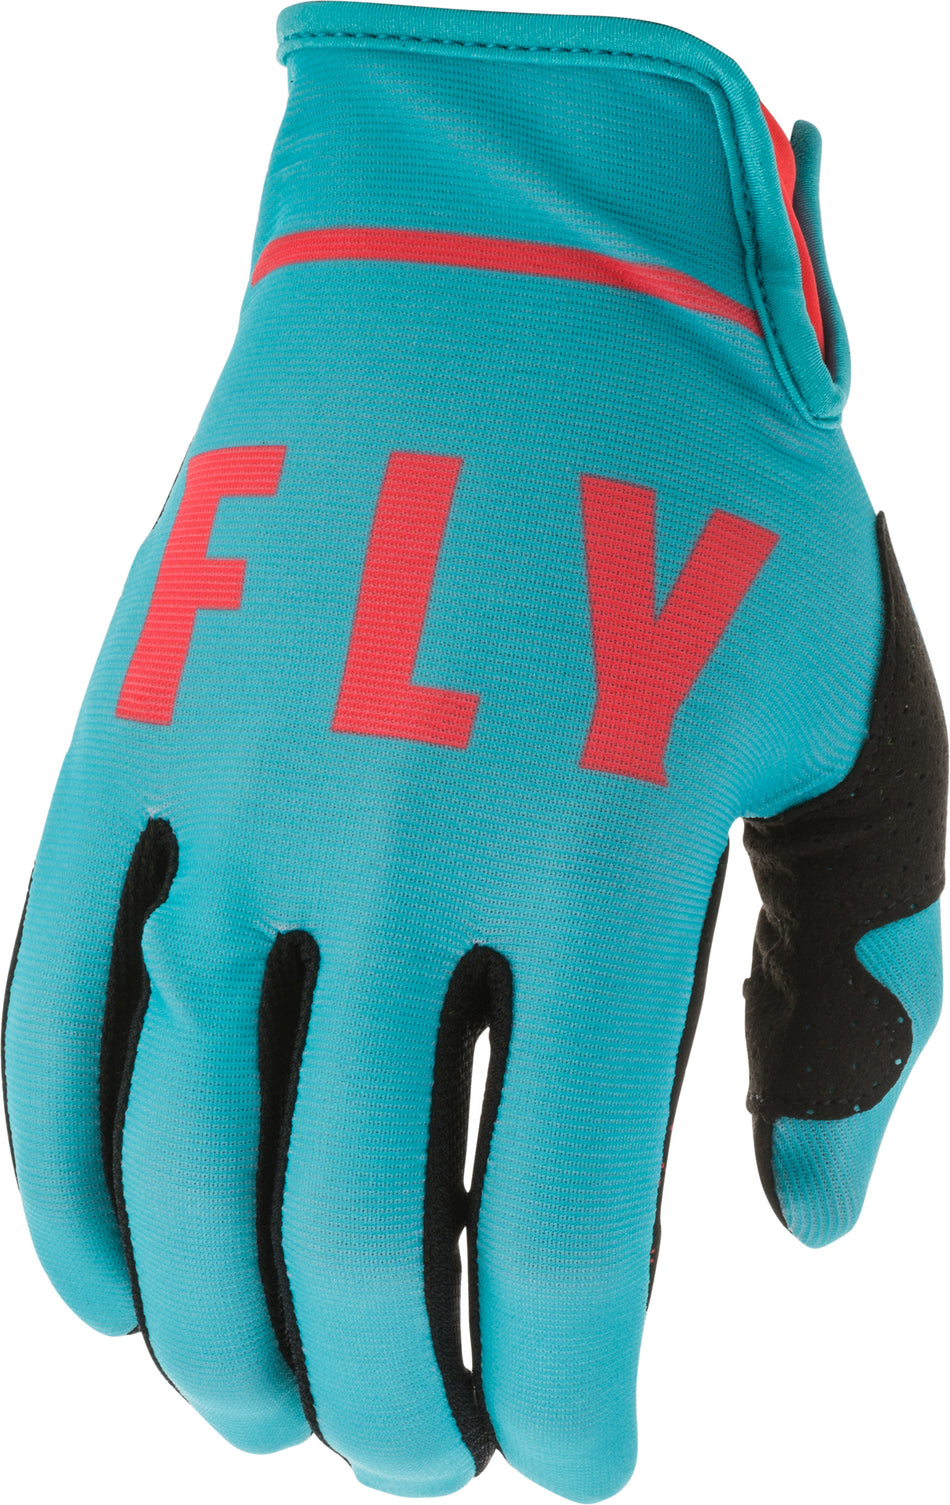 FLY RACING Lite Gloves Blue/Coral Sz 04 373-71904